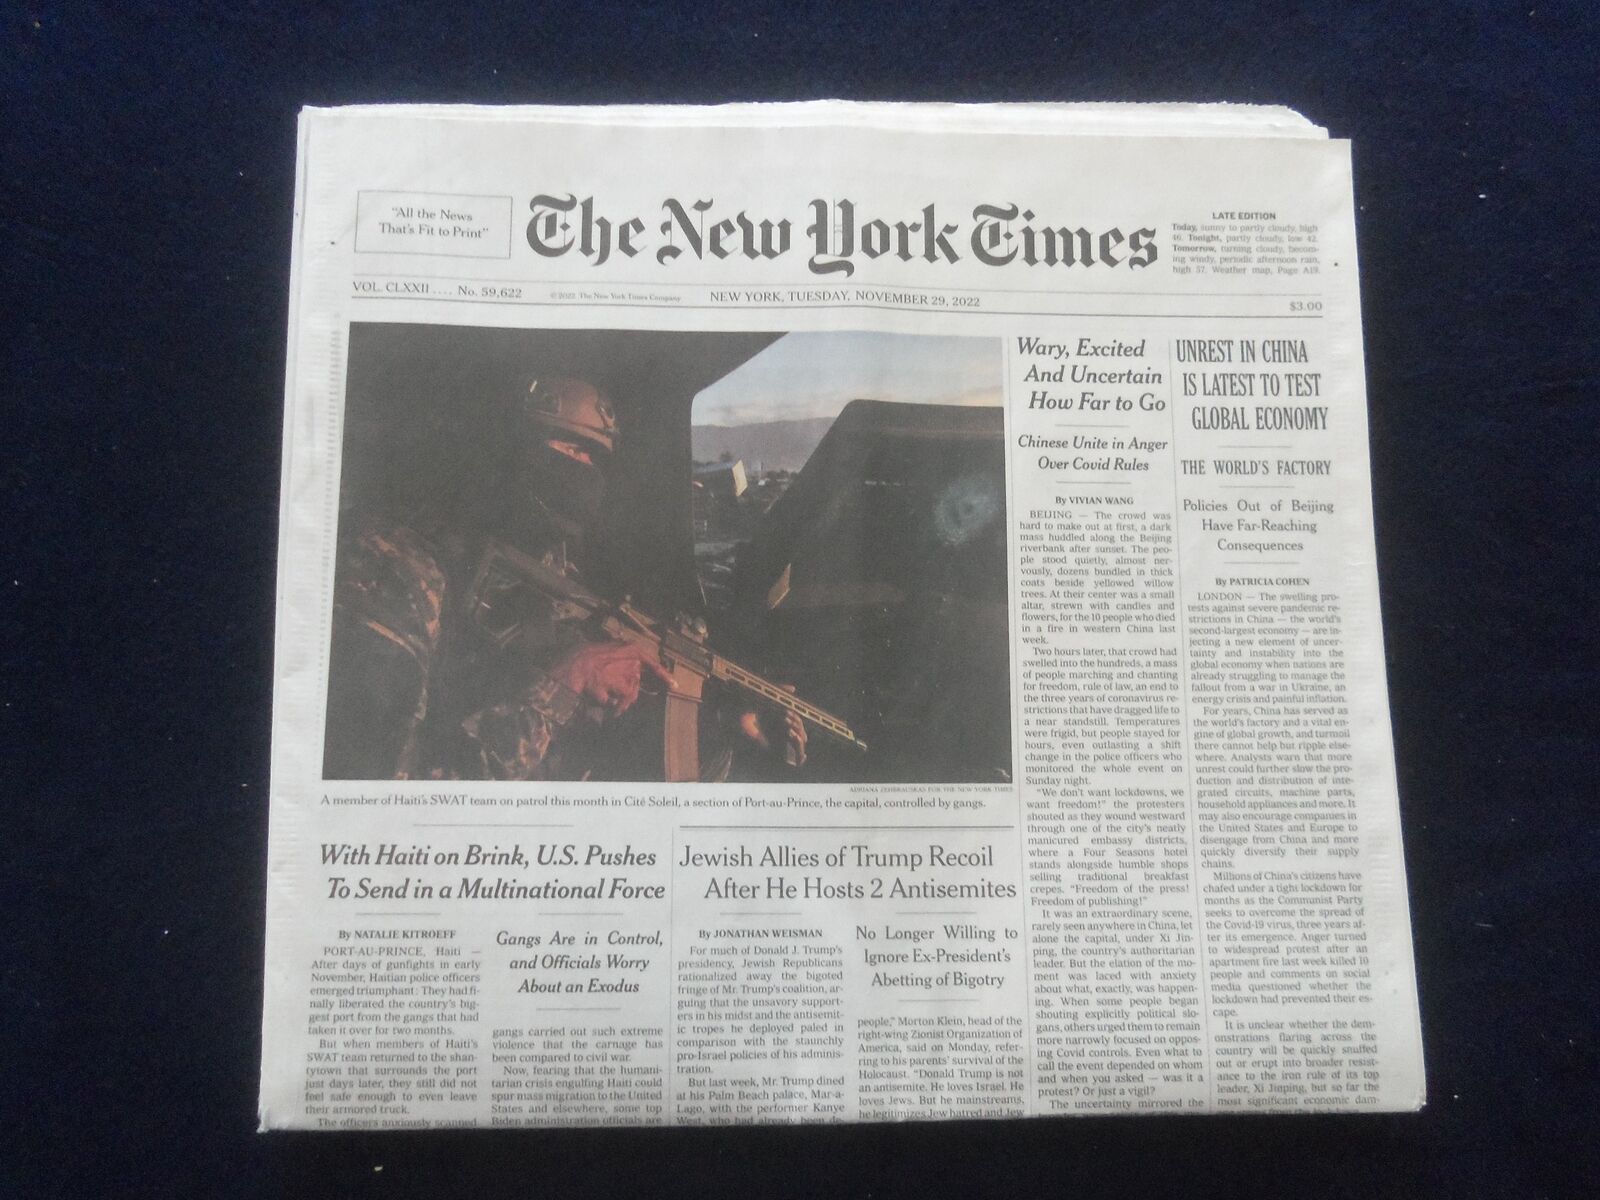 2022 NOV 29 NEW YORK TIMES - UNREST IN CHINA IS LATEST TO TEST GLOBAL ECONOMY